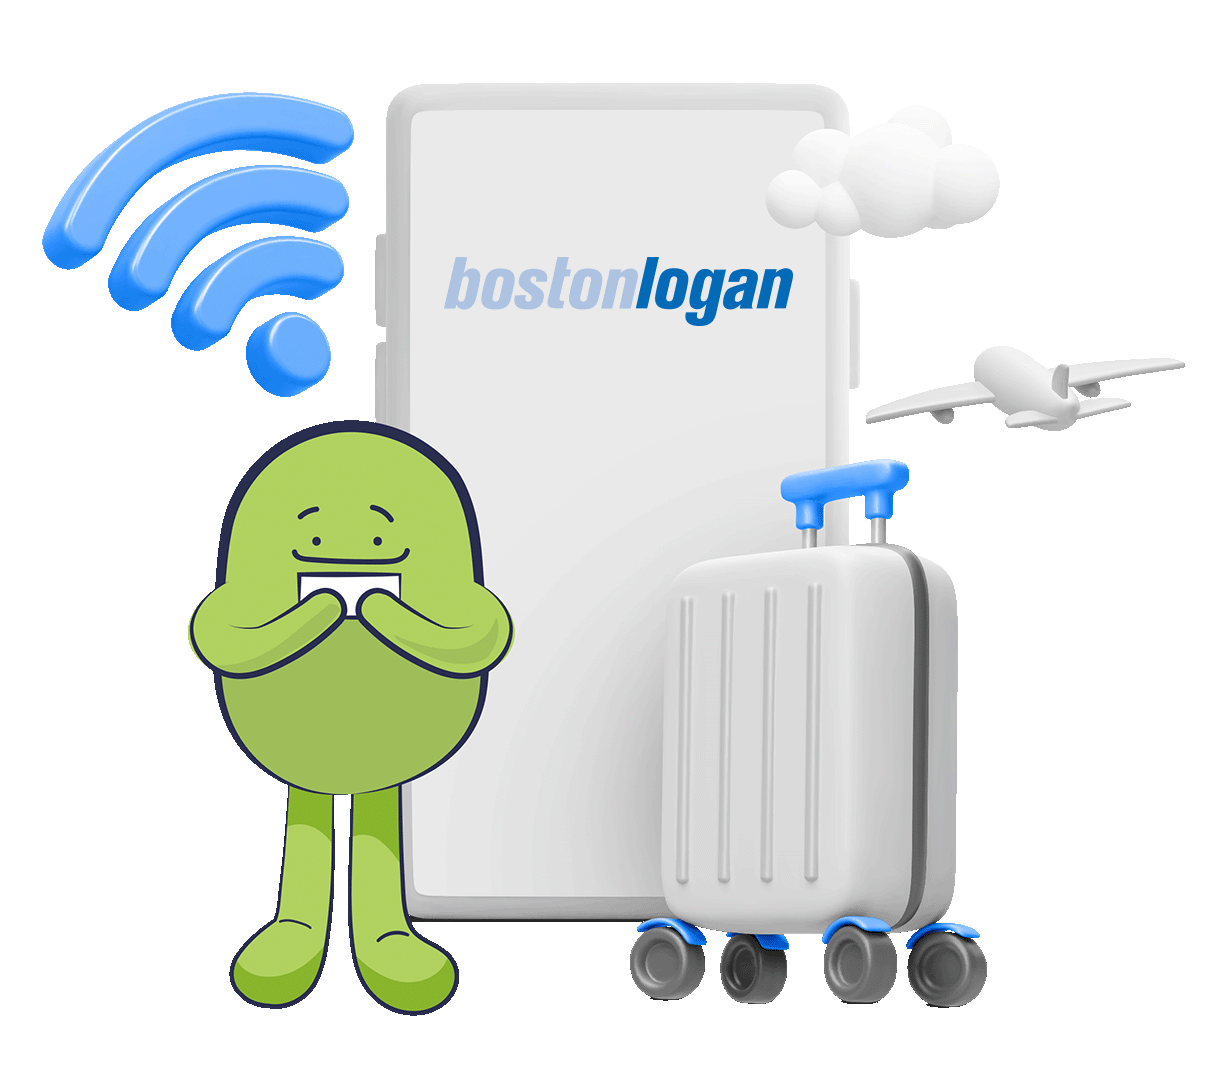 Connect to Logan Airport WiFi